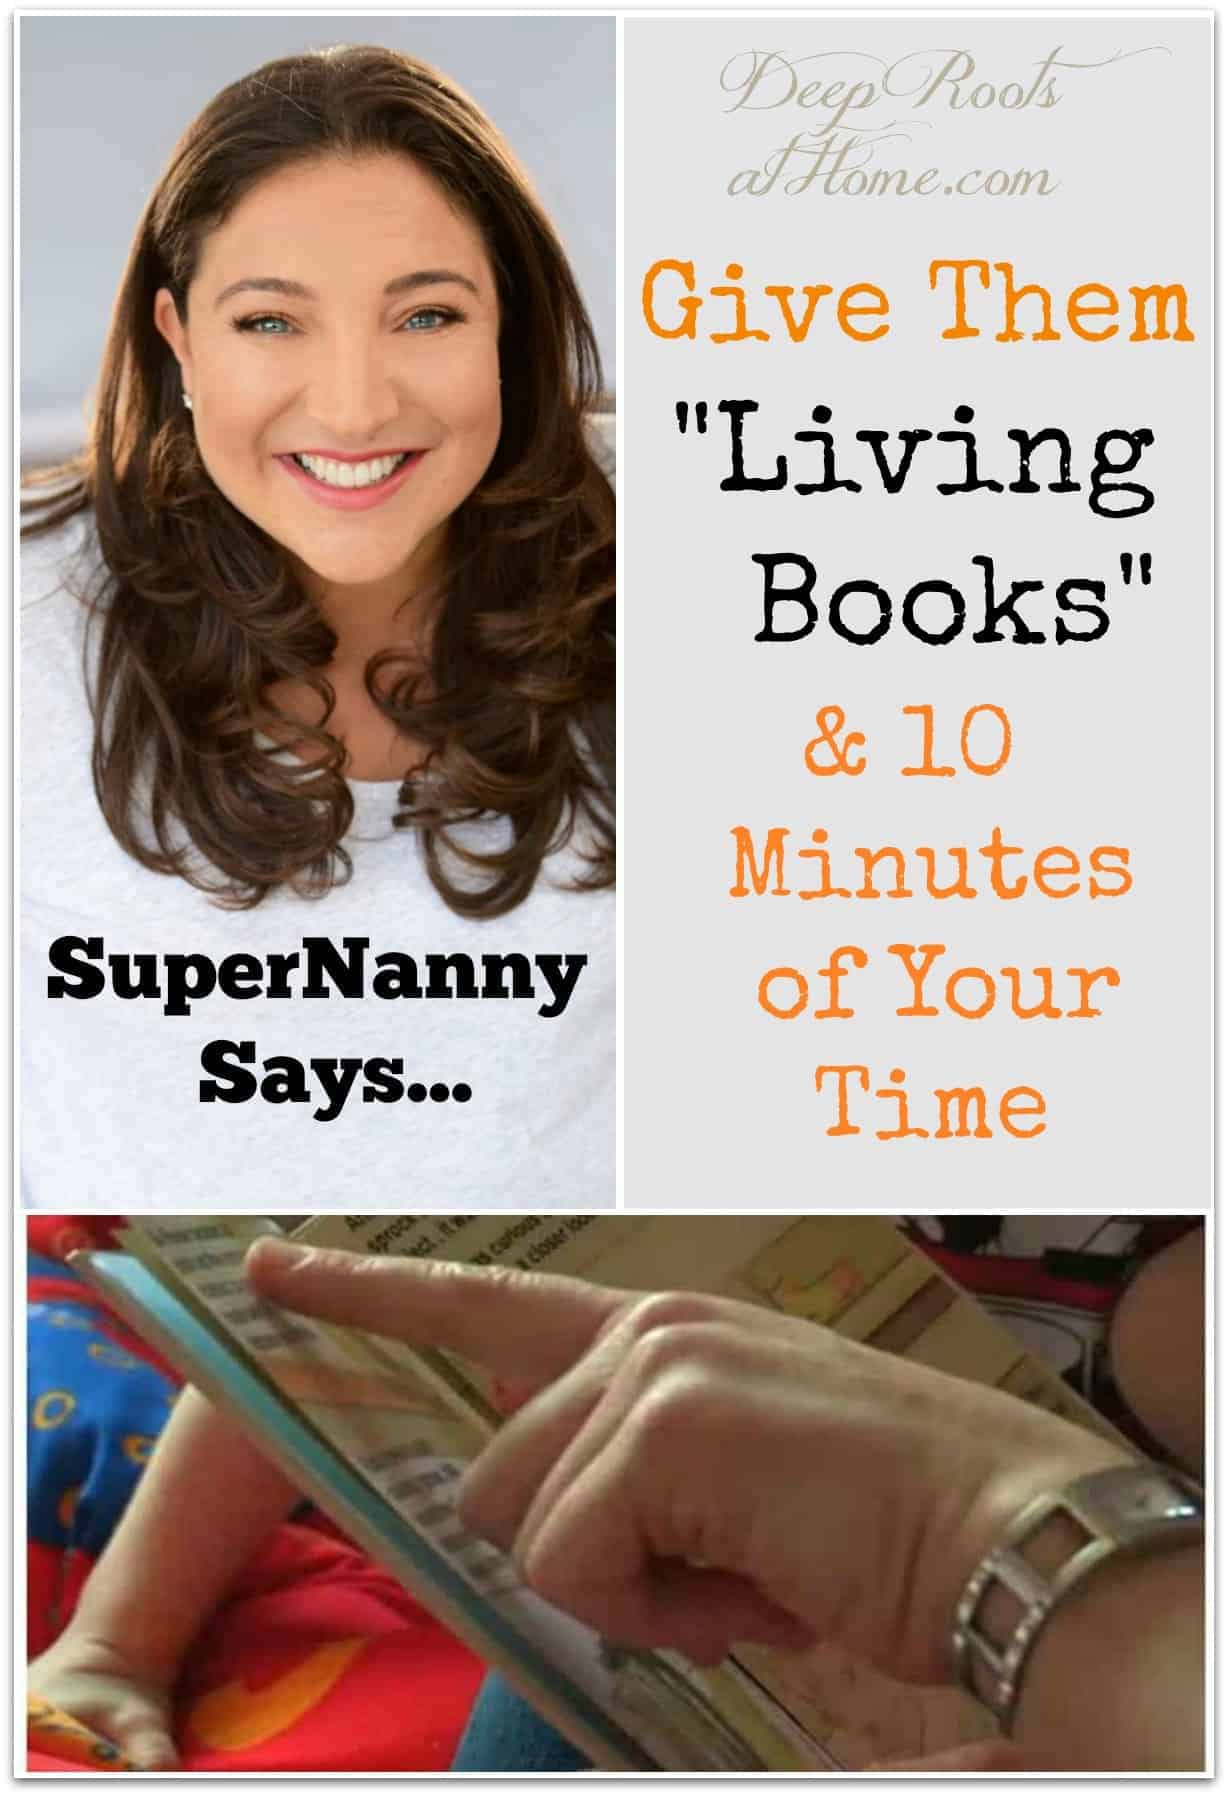 SuperNanny Says Give Them Living Books & 10 Minutes of Your Time. SuperNanny Says to read to your children 10 minutes a day!